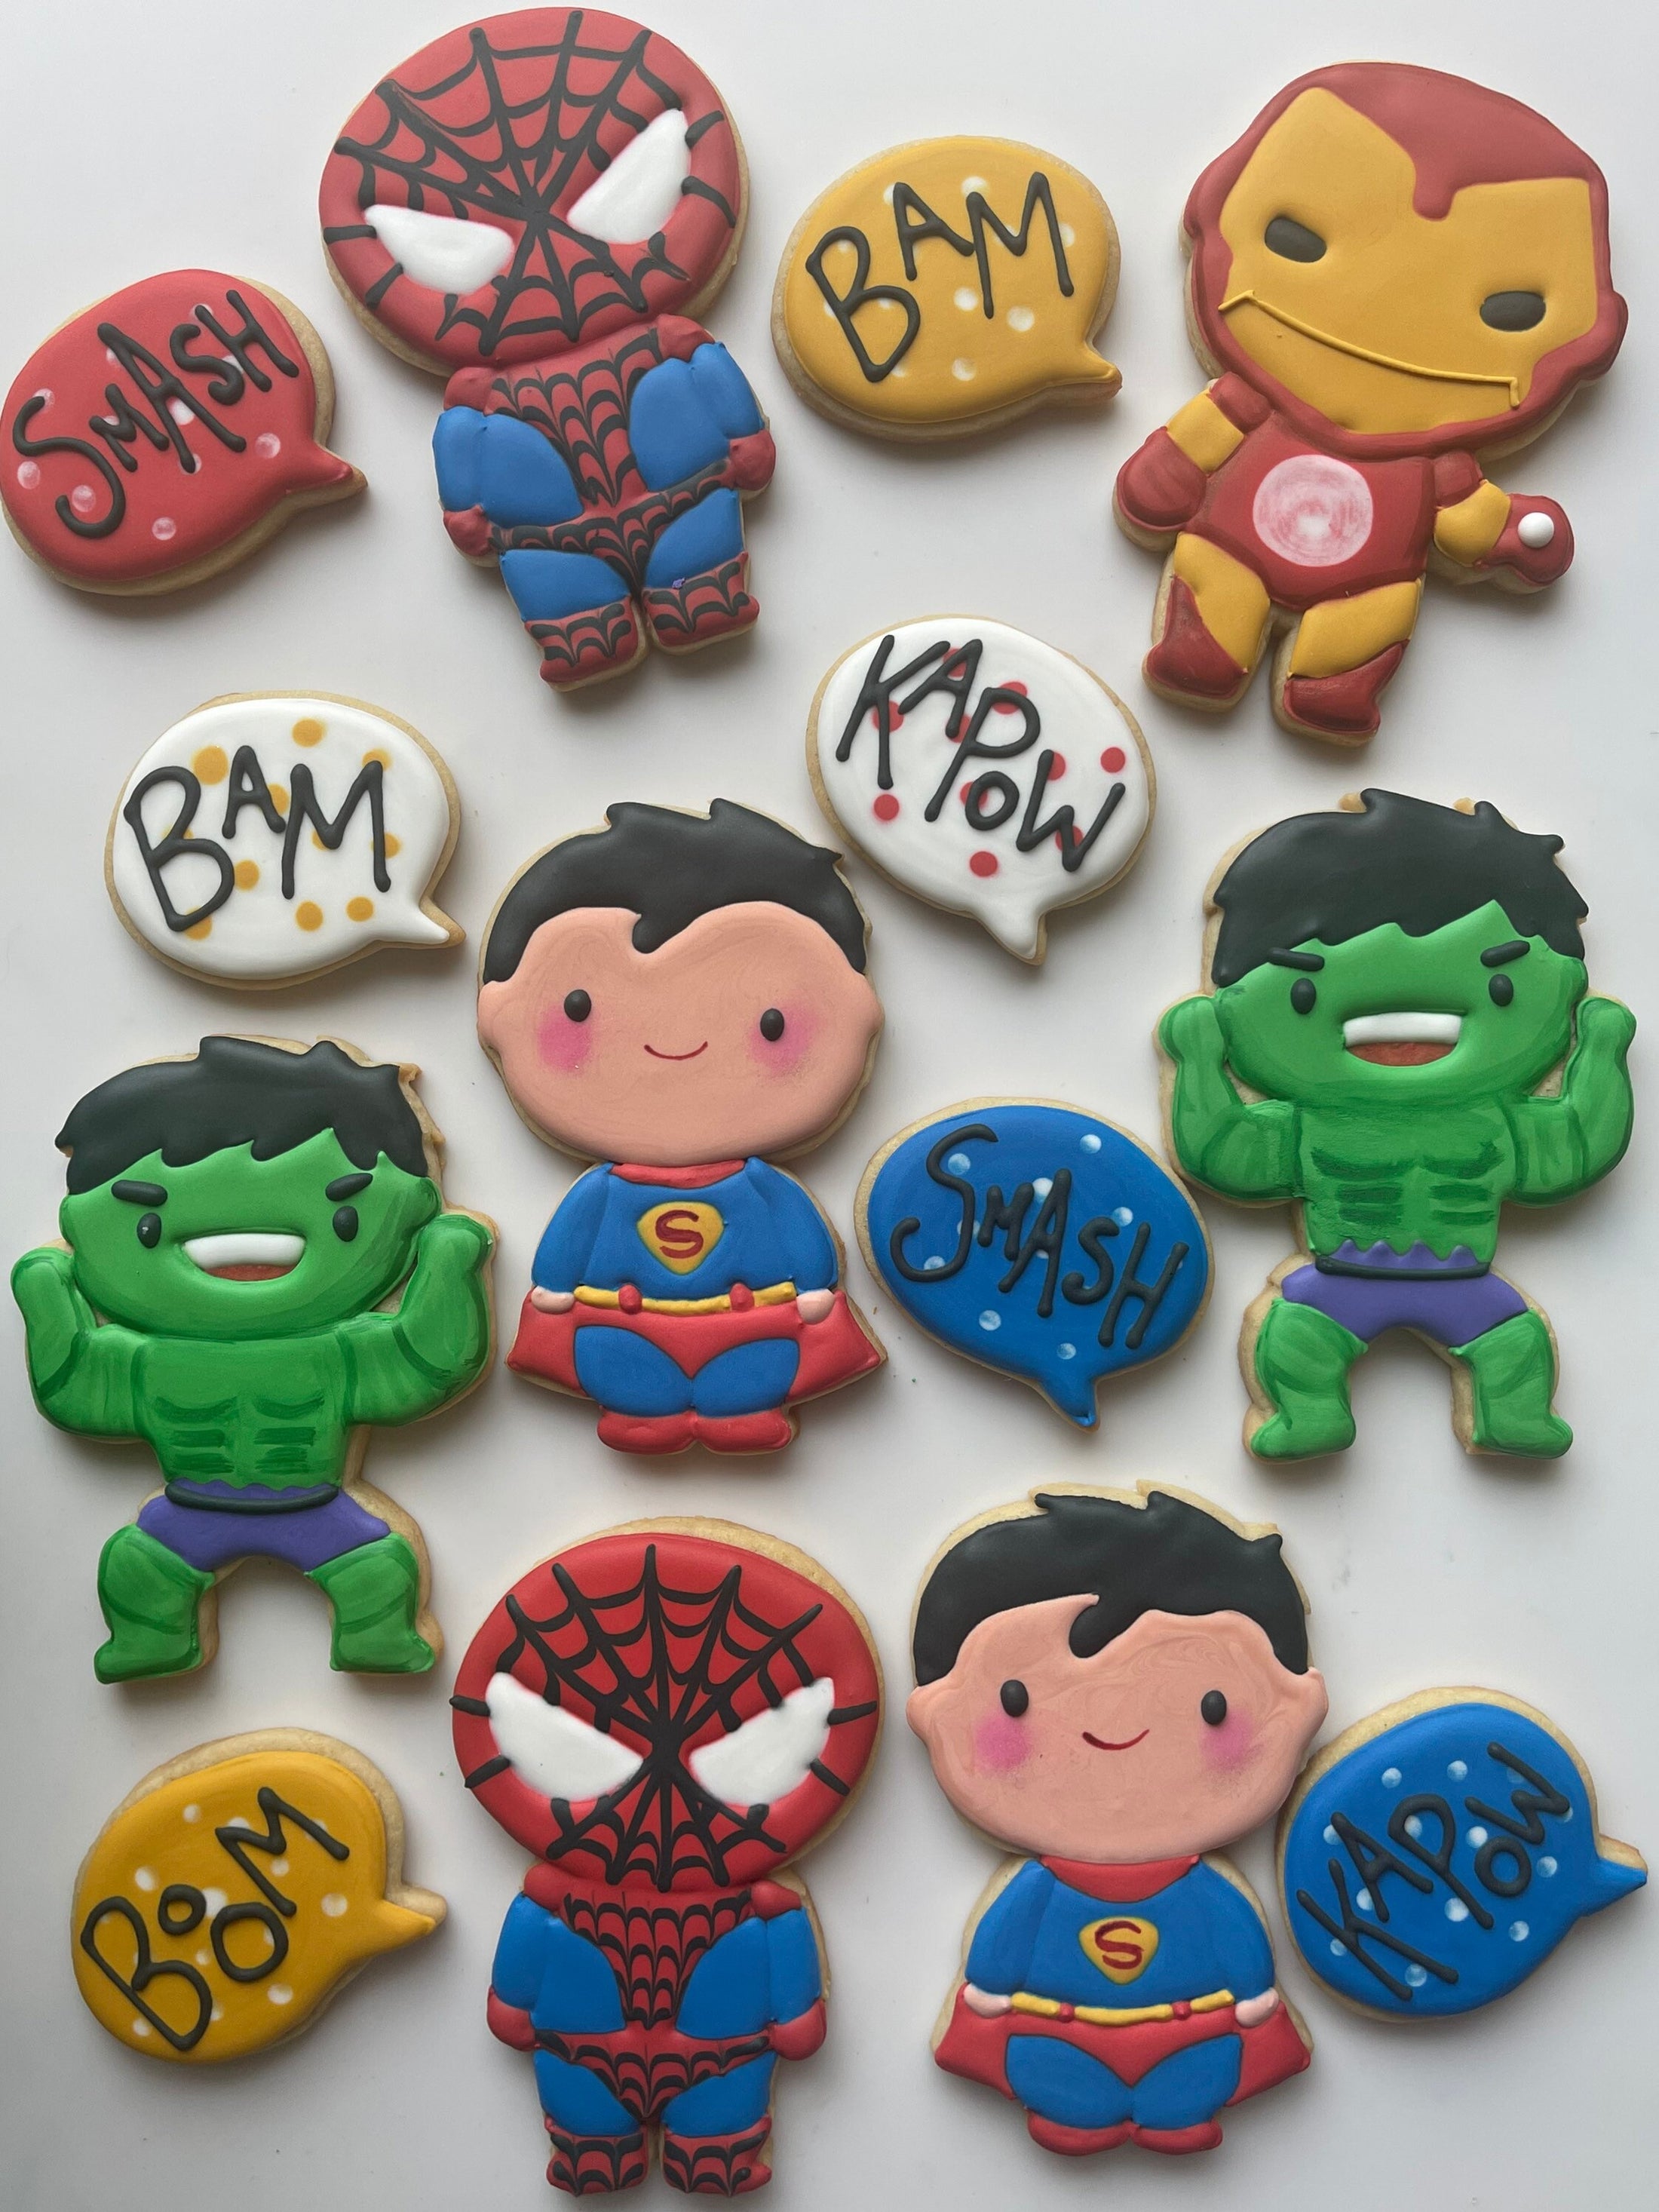 Shop Now: Your Favorite Super Heroes as Cookie Cutters